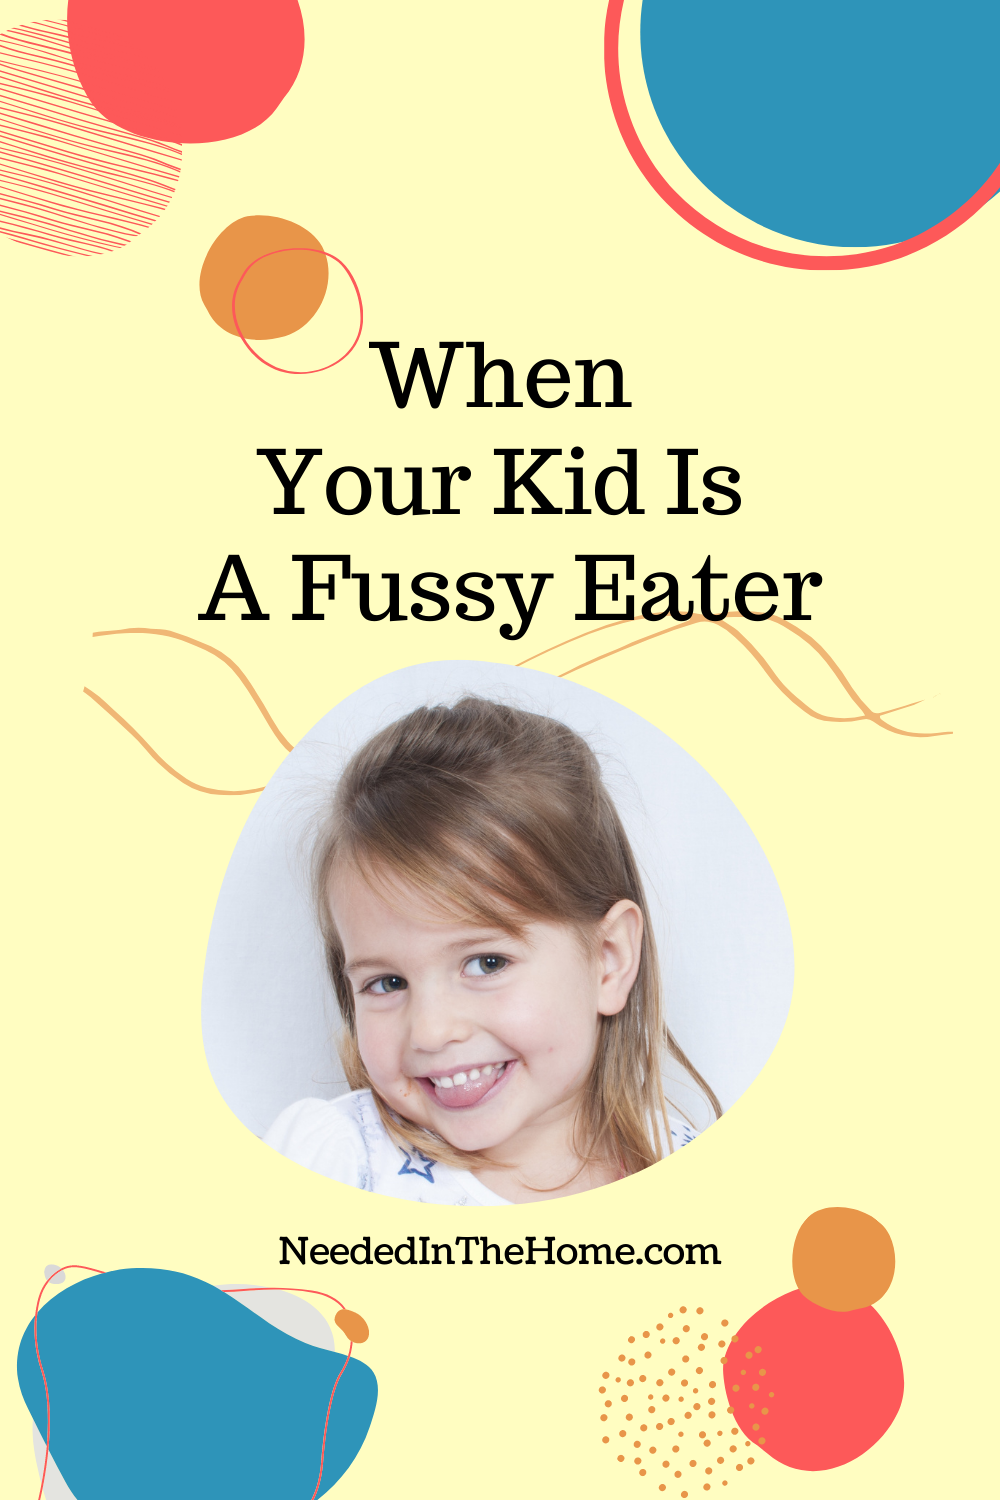 pinterest-pin-description when your kid is a fussy eater young girl sticking tongue out with a smile neededinthehome